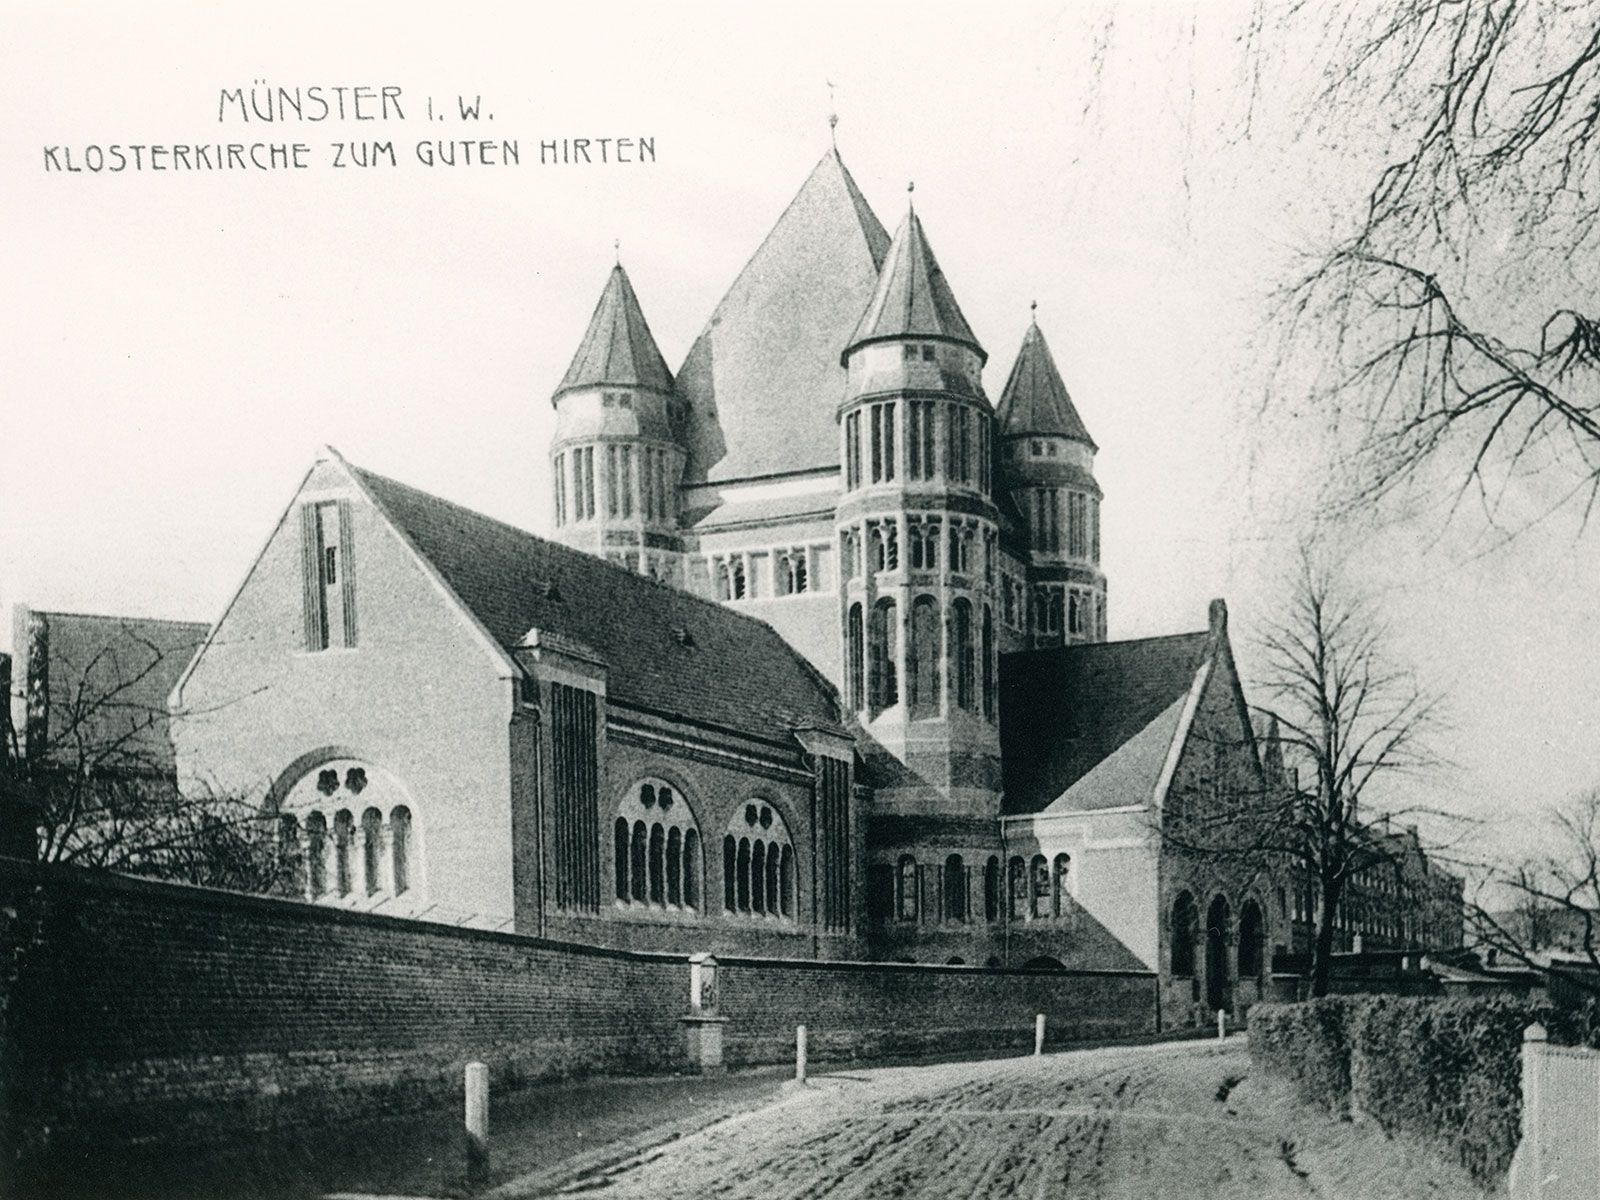 Postcard of the old monastery church